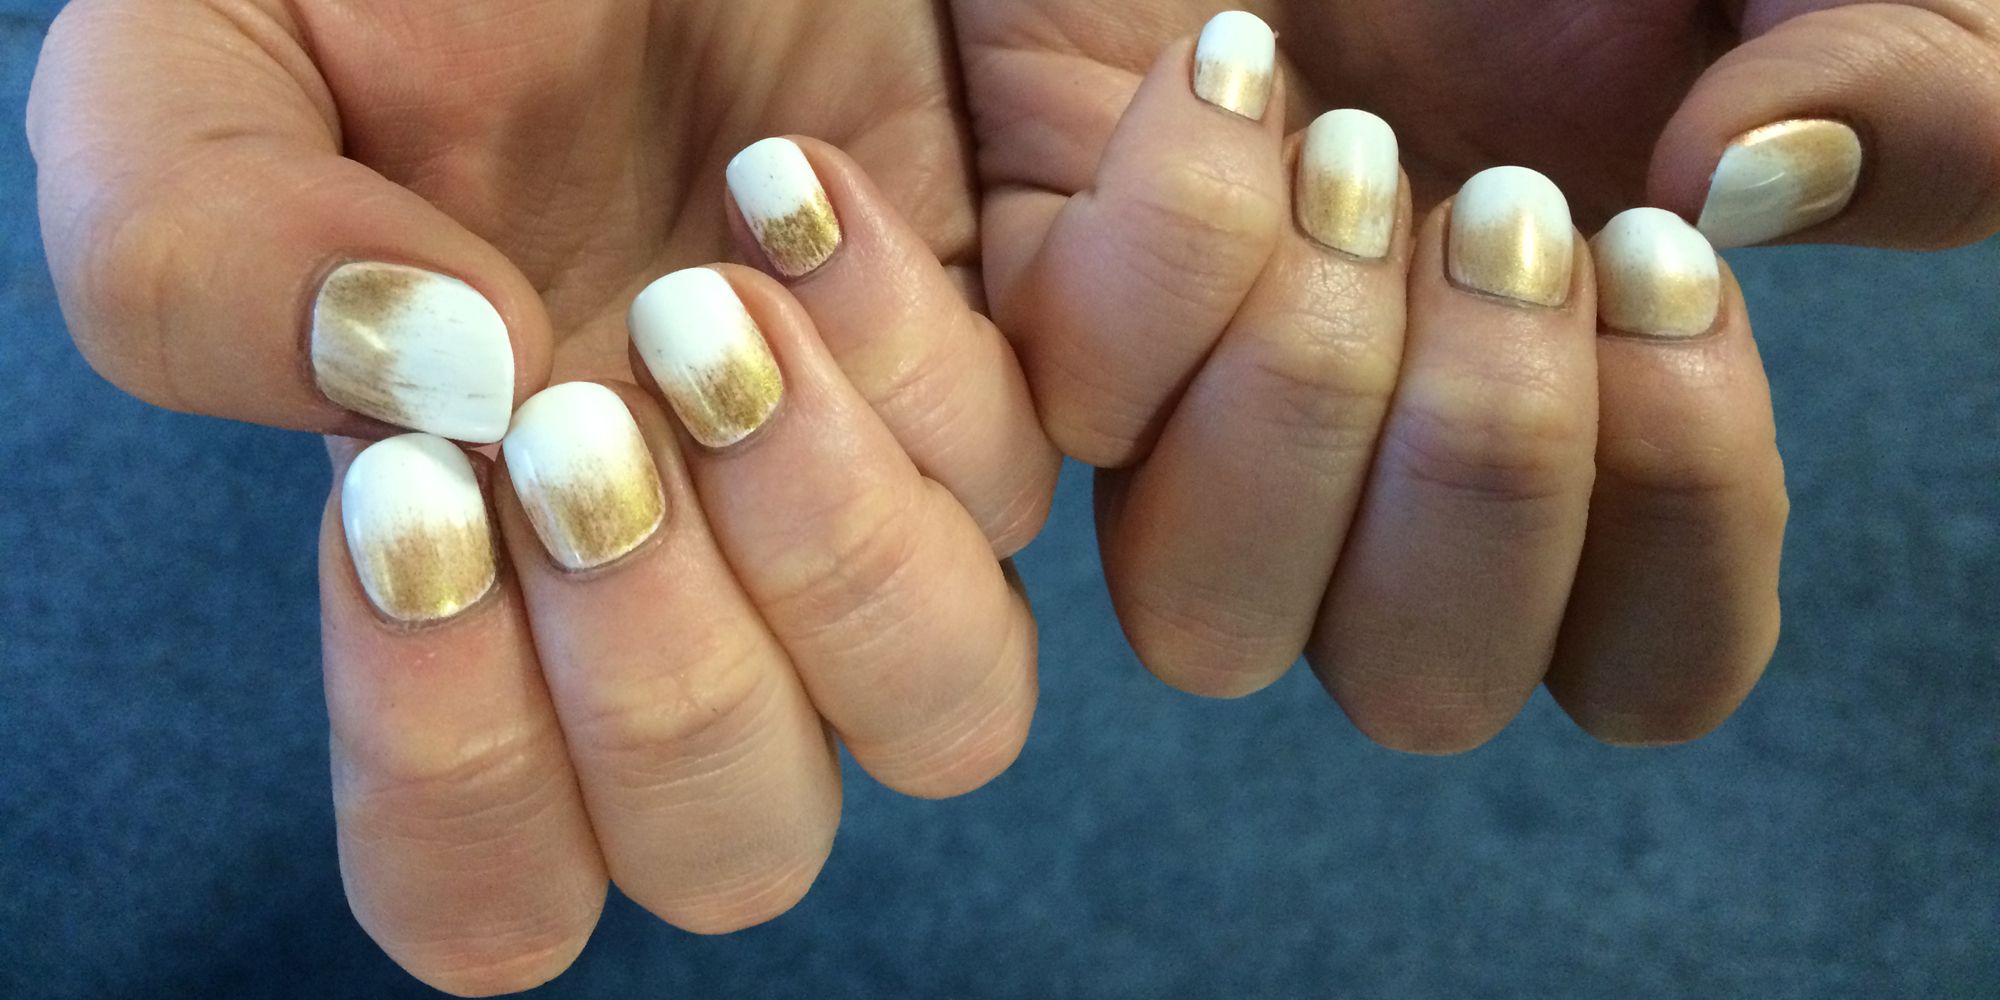 Nail Art How-To: Gold And White Ombre Nails